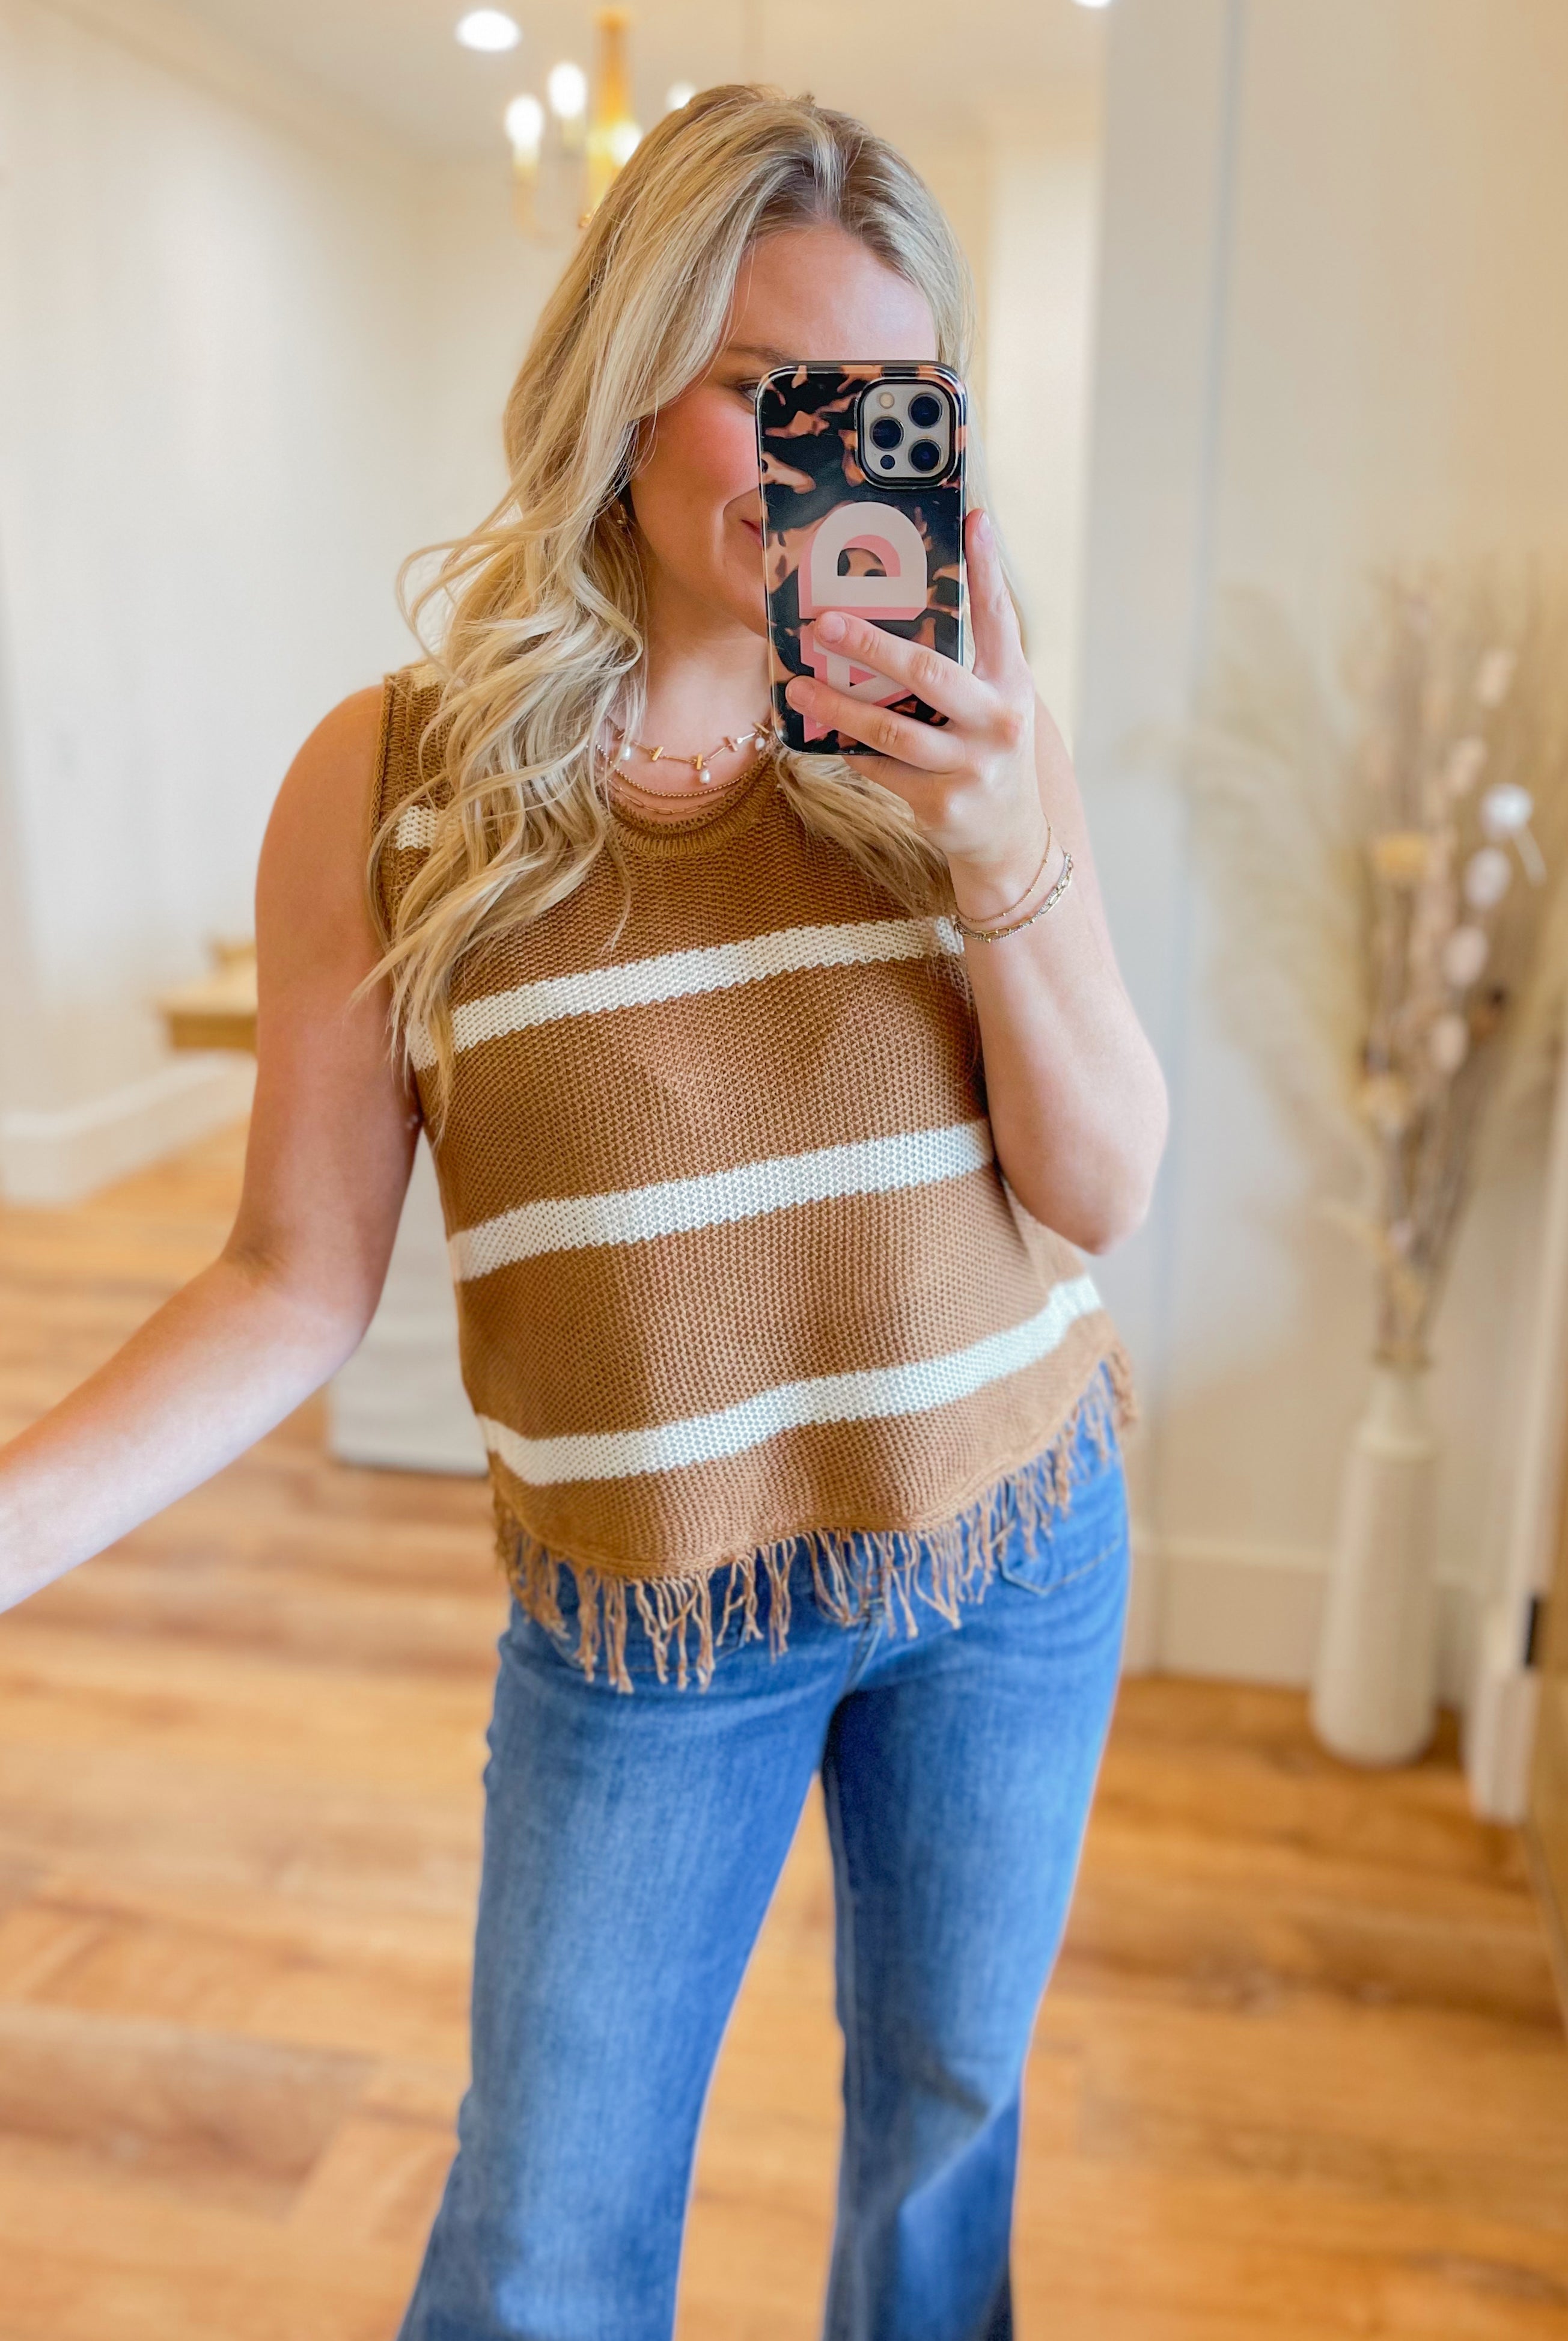 Frenchy Striped Fringe Sweater Tank - Be You Boutique